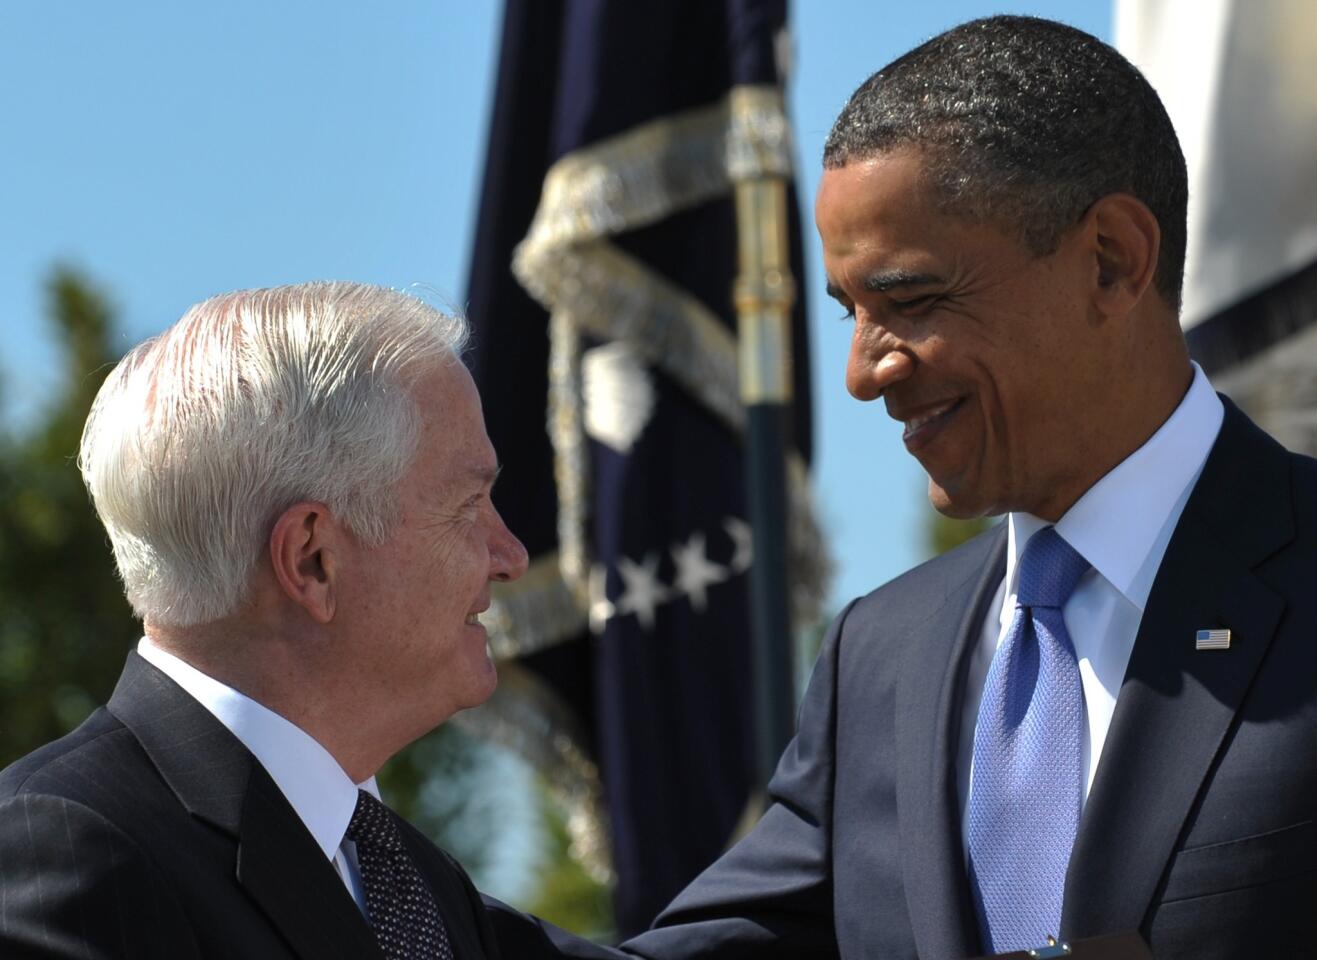 President Obama smiles at outgoing U.S. Defense Secretary Robert Gates after presenting him the Medal of Freedom during the Armed Forces Farewell Tribute in honor of Gates at the Pentagon in Washington, D.C., in 2011.